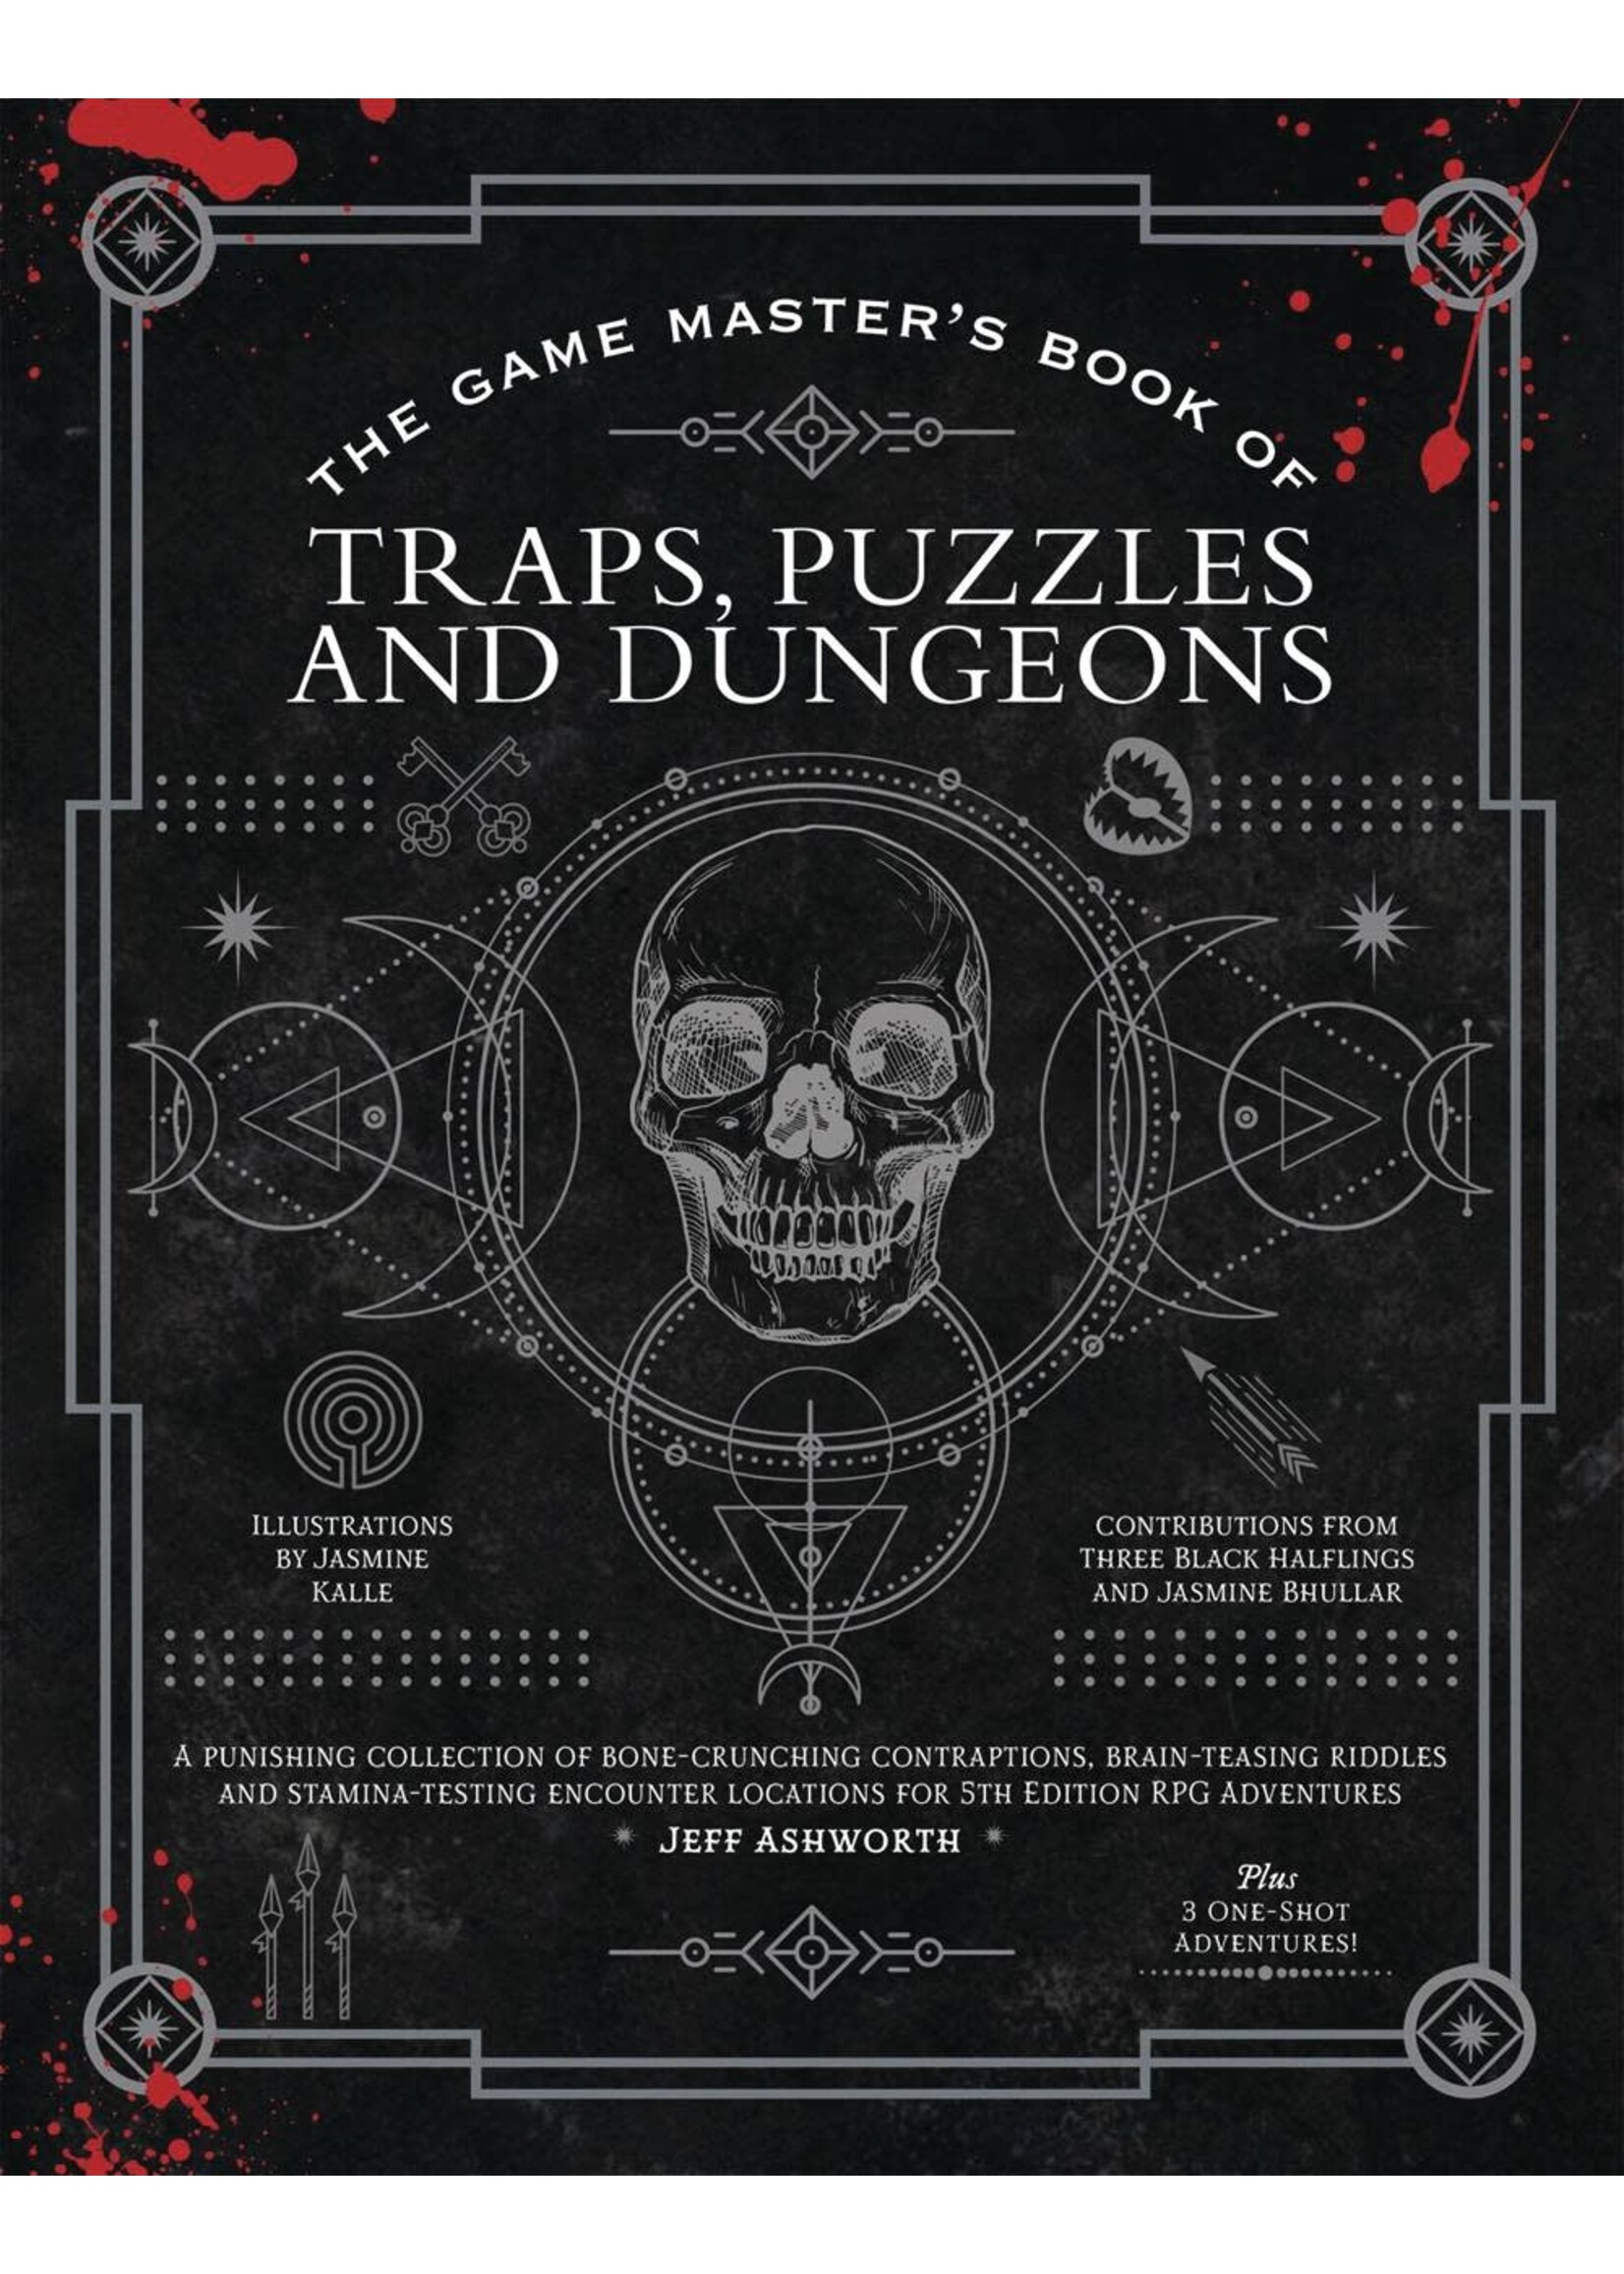 TOPIX MEDIA LAB THE GAME MASTER'S BOOK OF TRAPS, PUZZLES, DUNGEONS